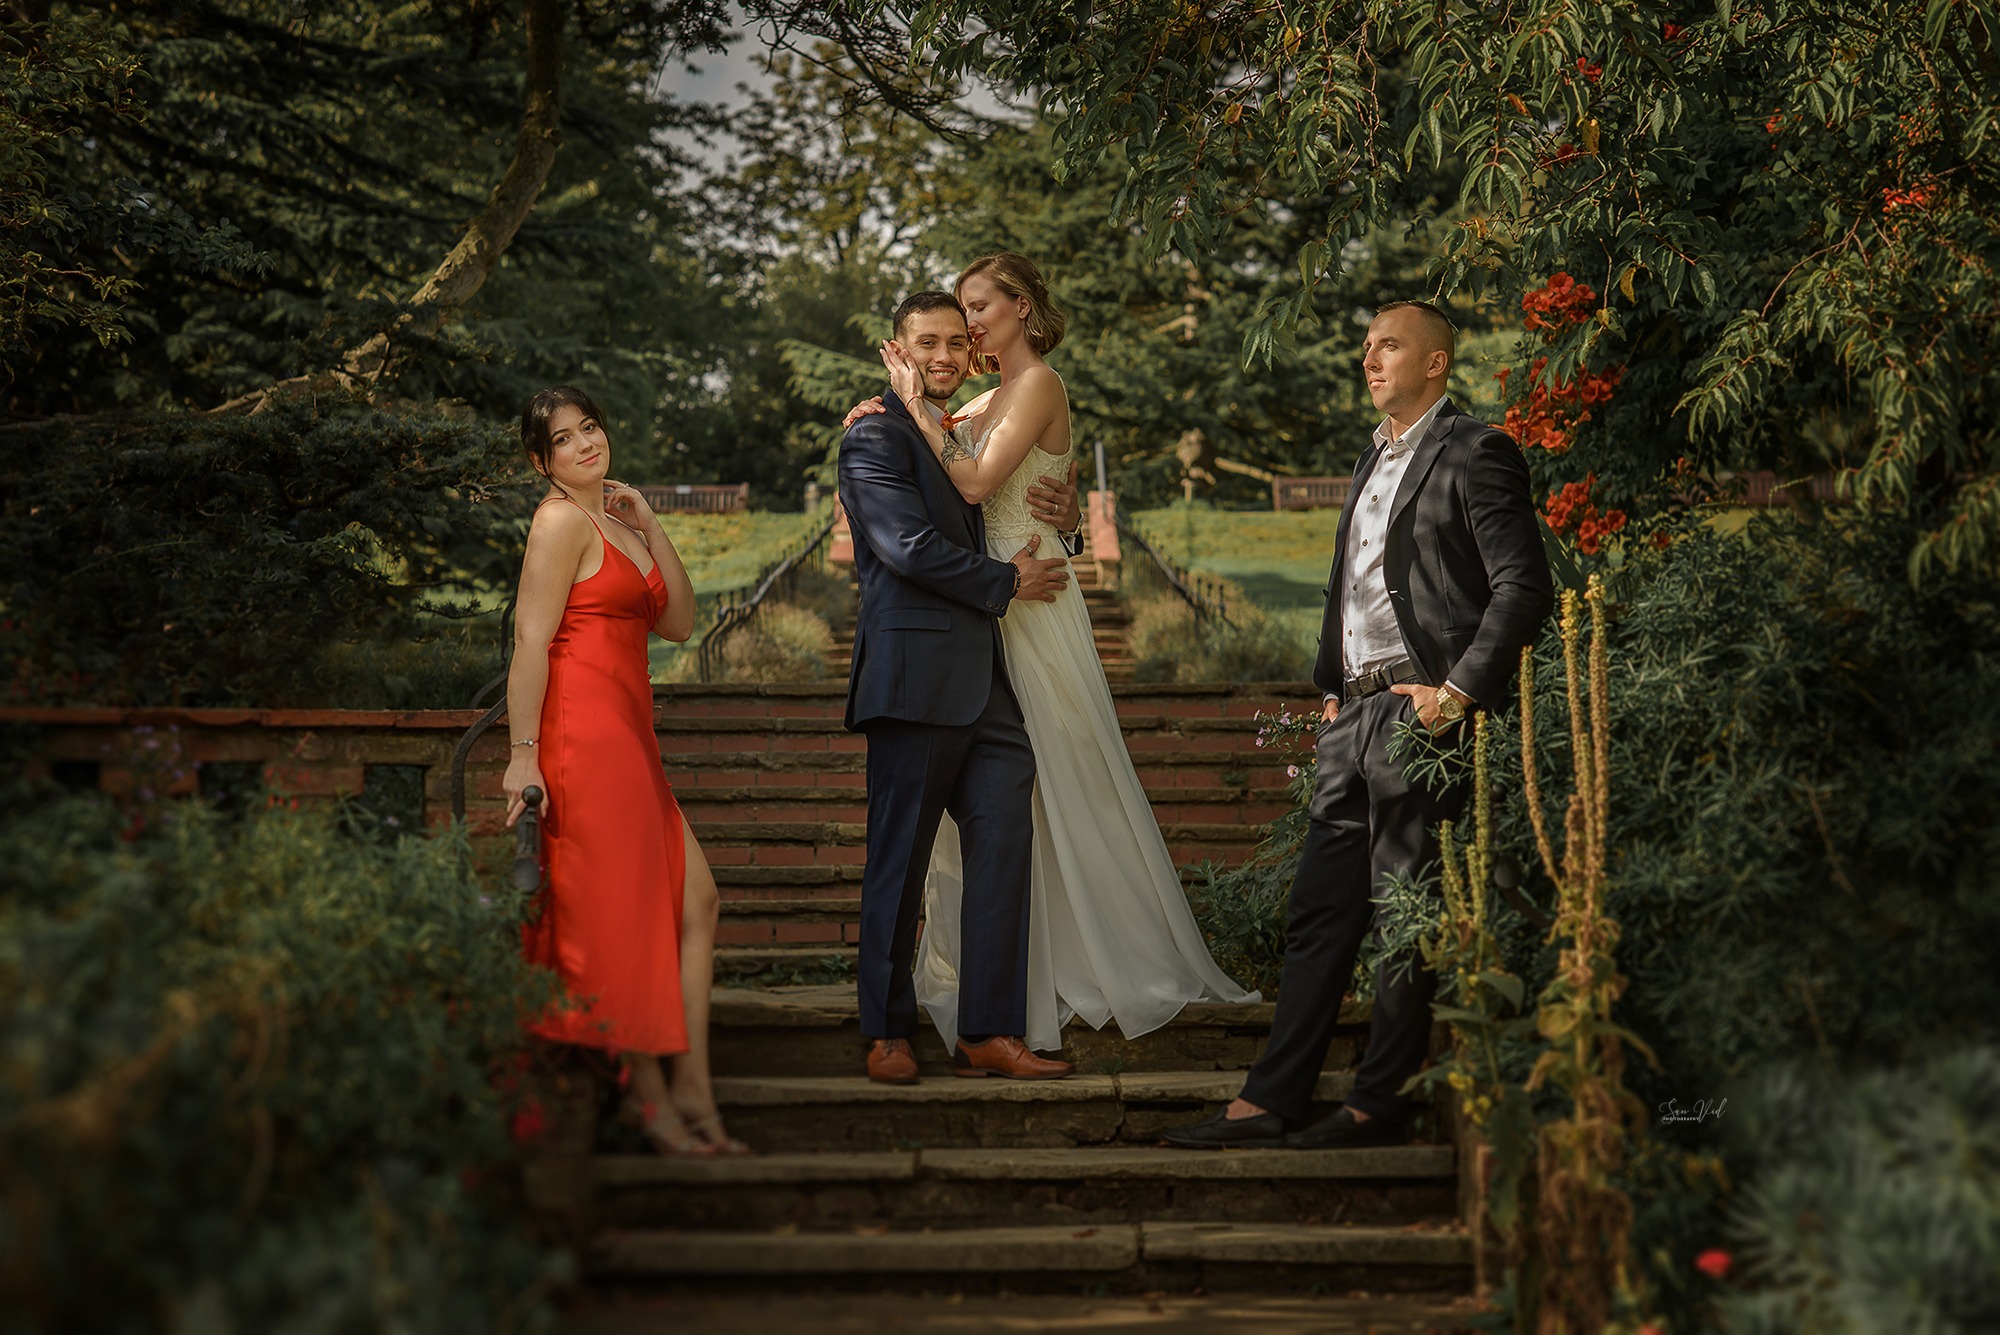 Creative Wedding Photography Groupe Picture The Rookery Park London